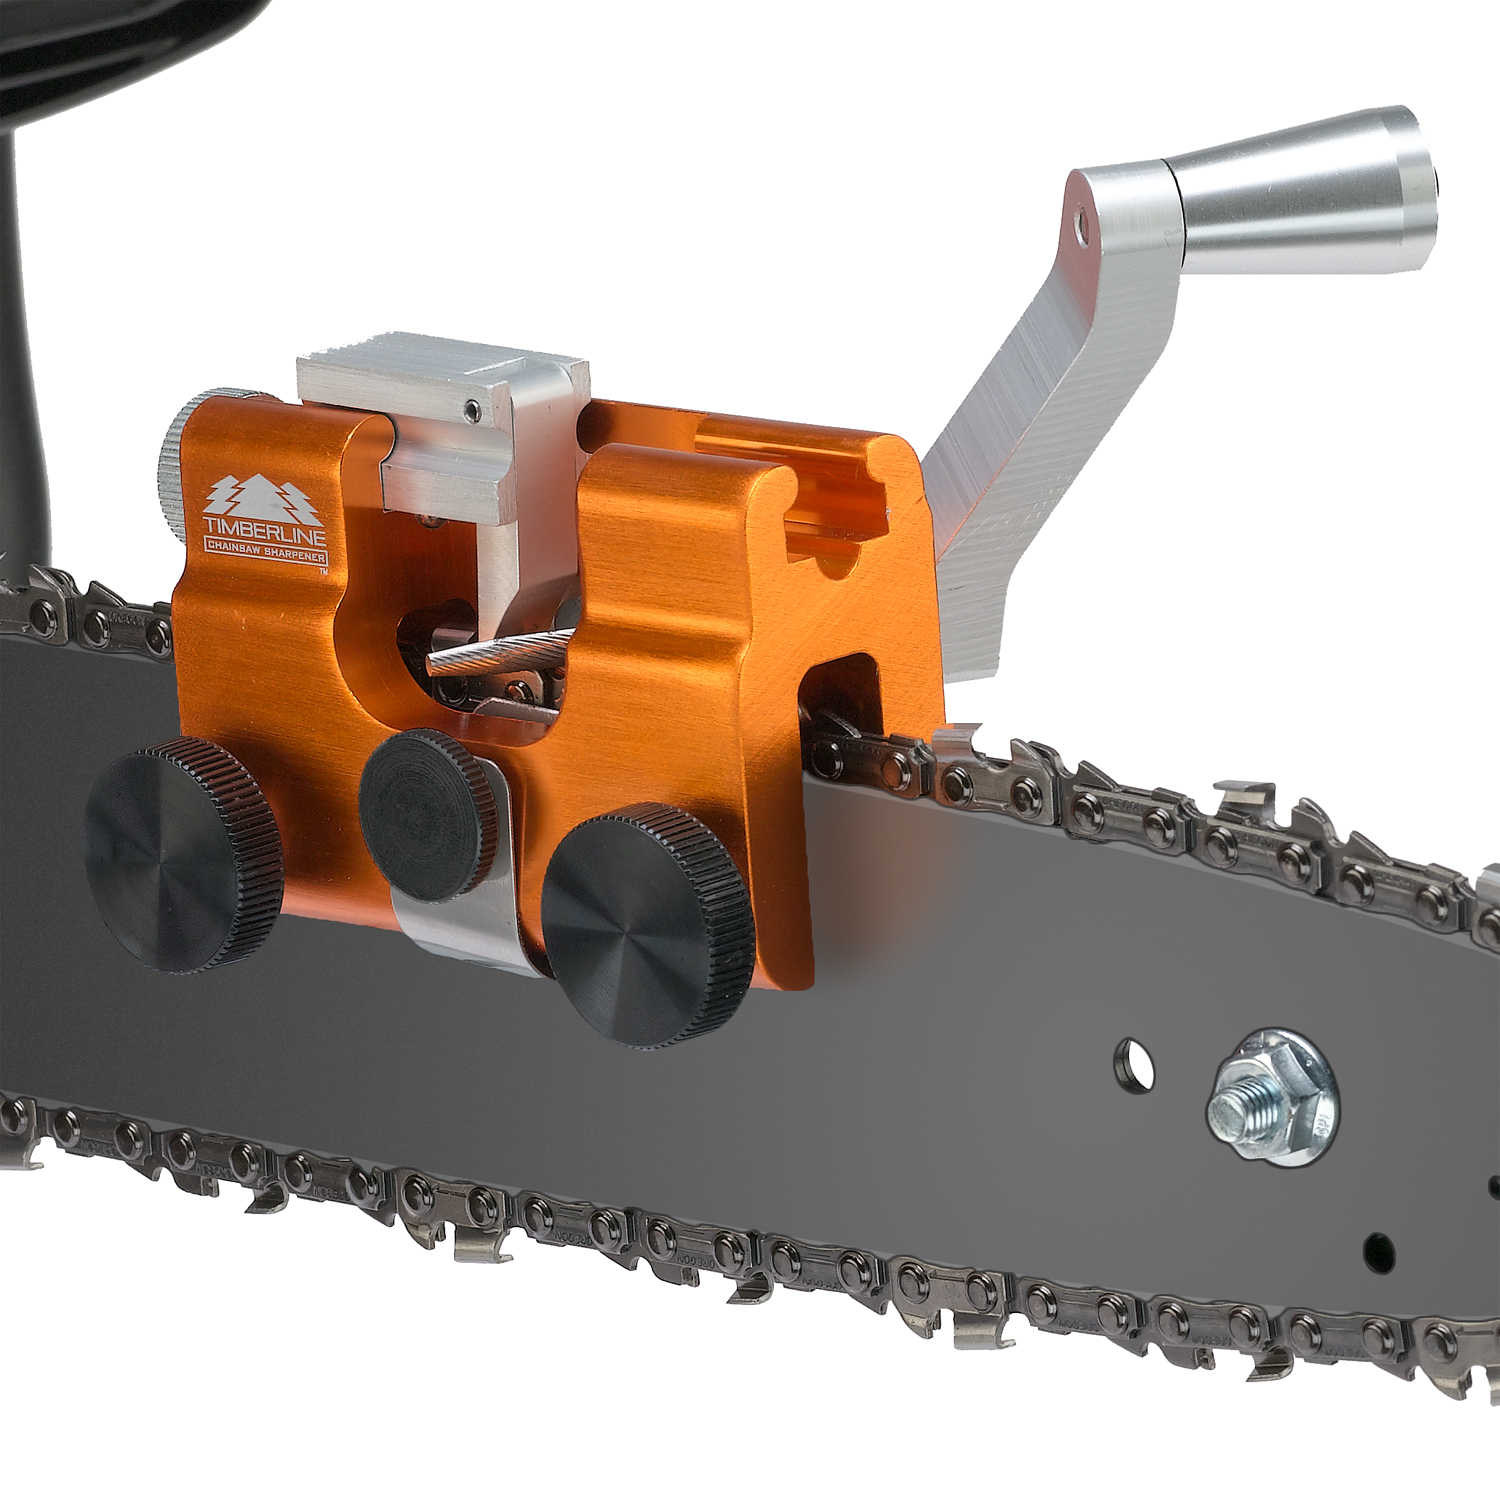 How to Use a Timberline Chainsaw Sharpener 